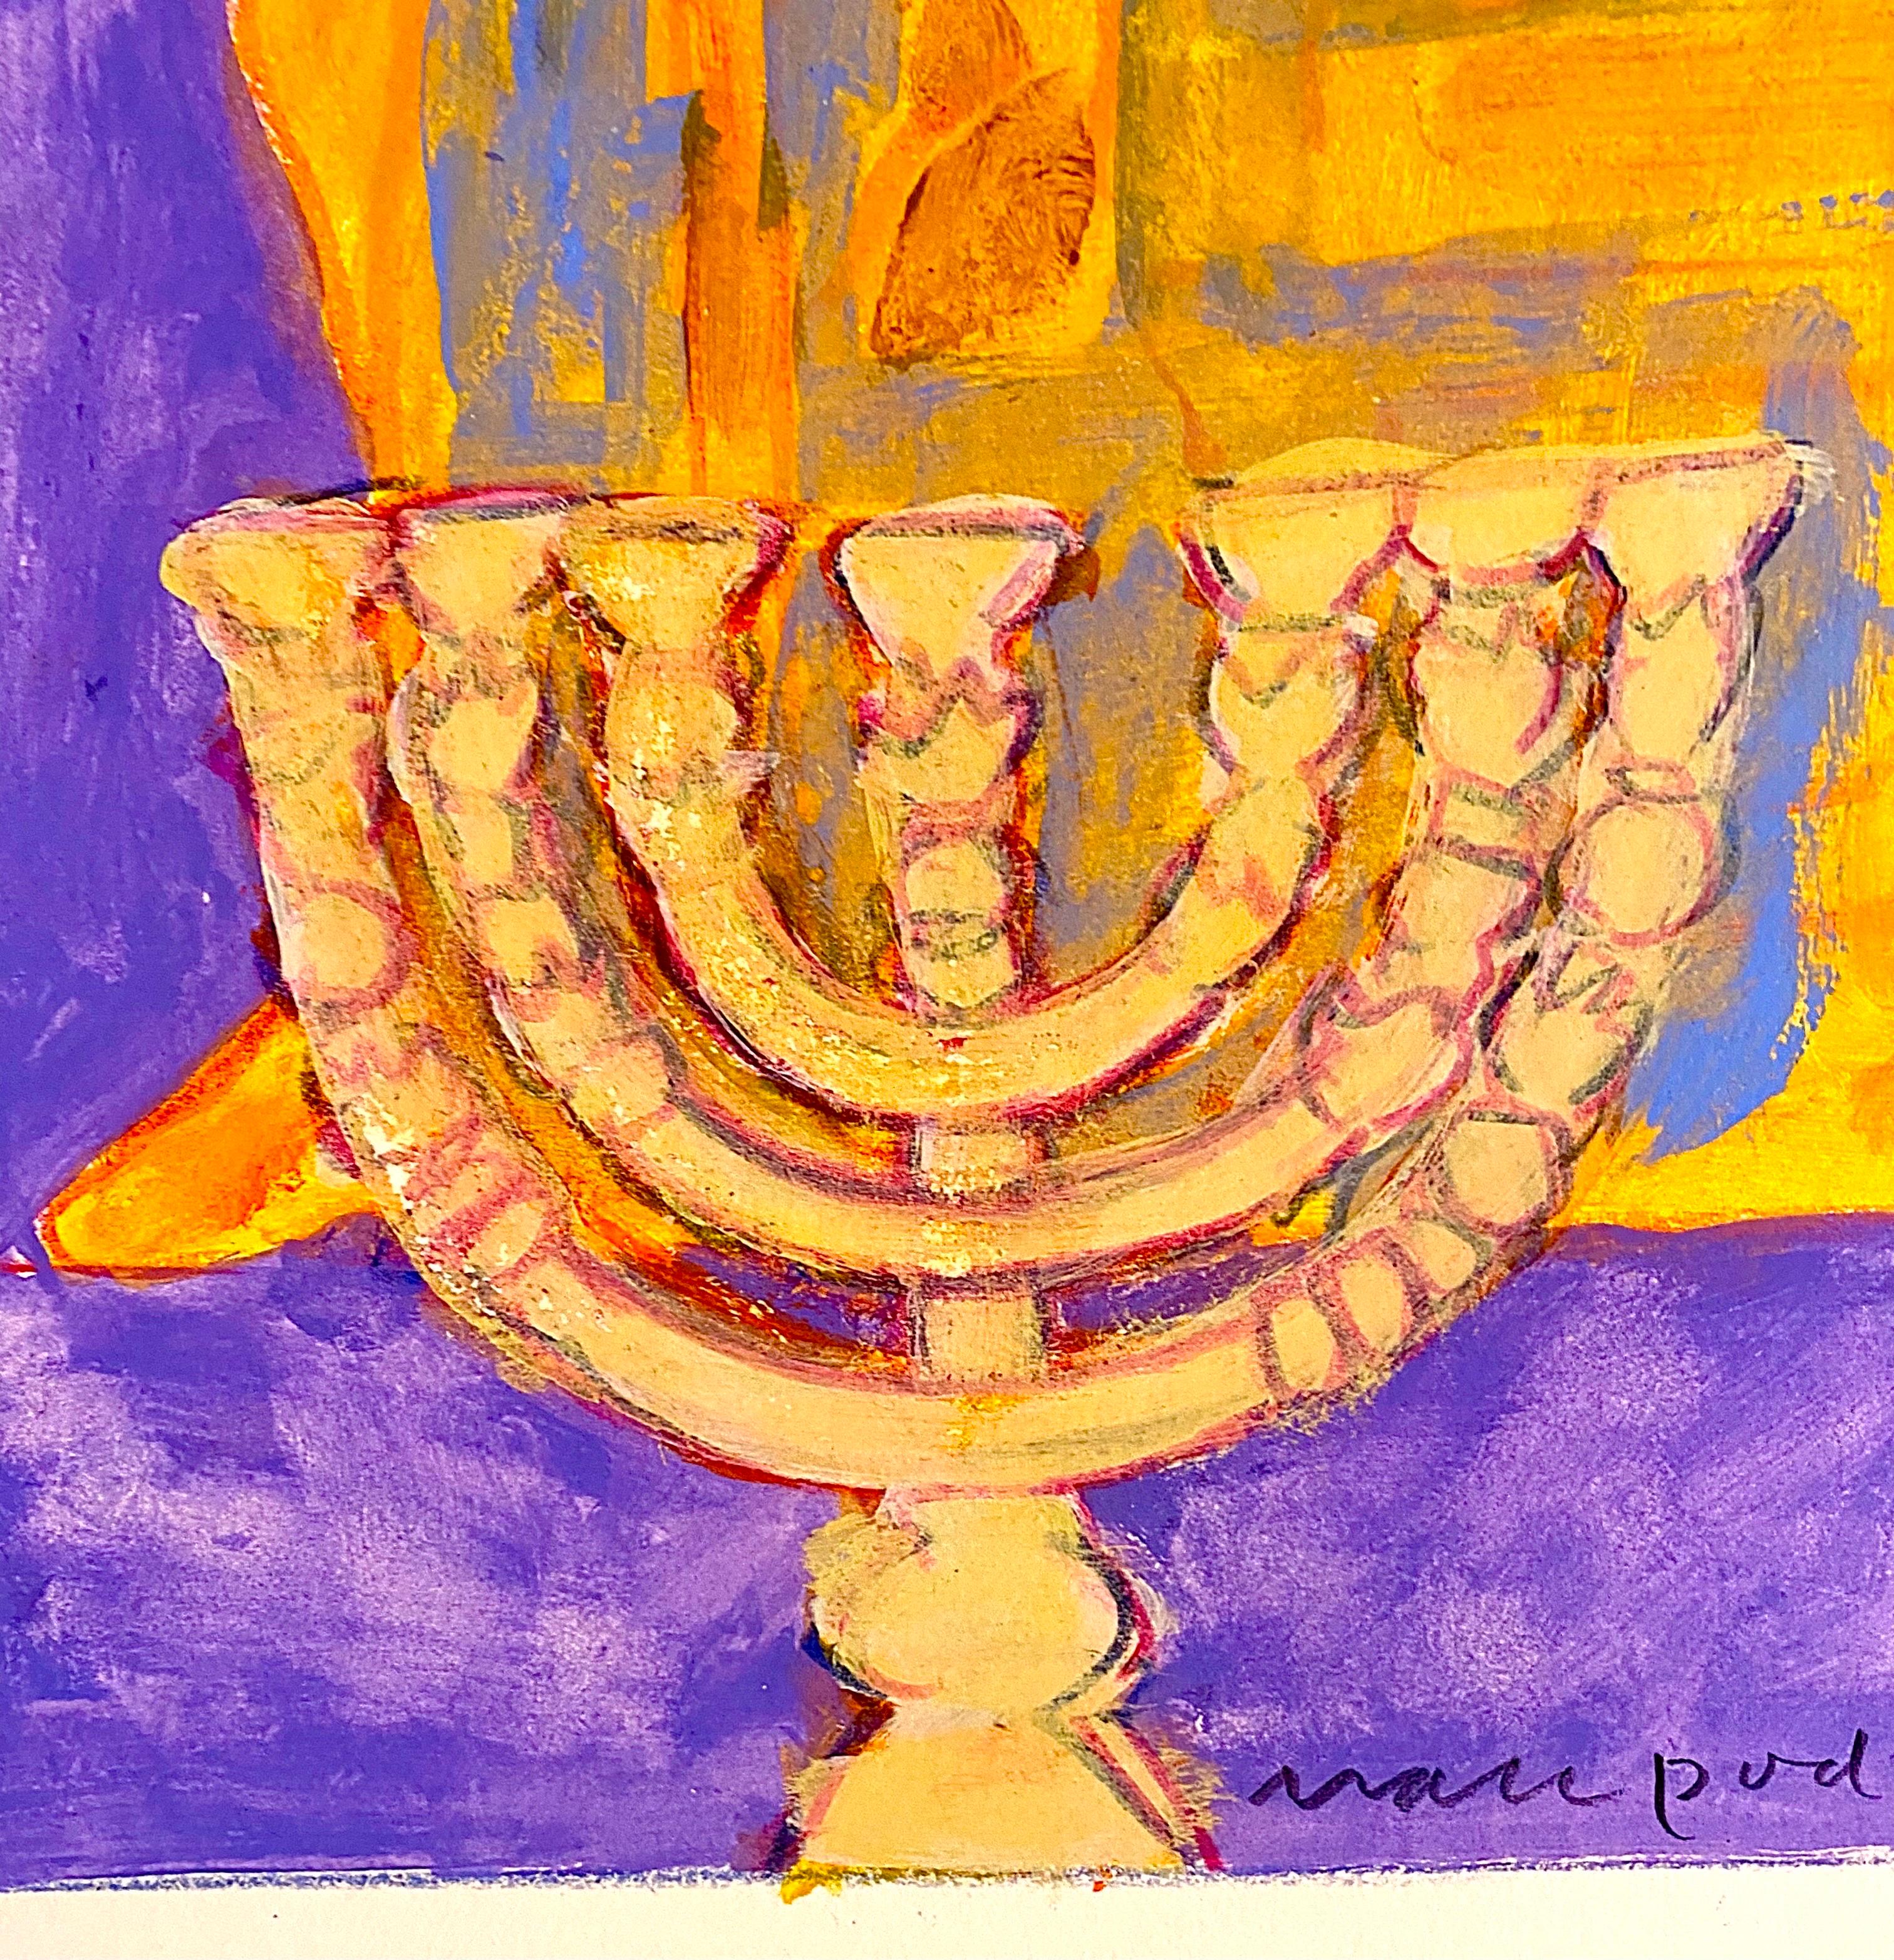 Large Archival Pigment Print Judaica Lithograph Mark Podwal Jewish Hebrew Art  For Sale 2